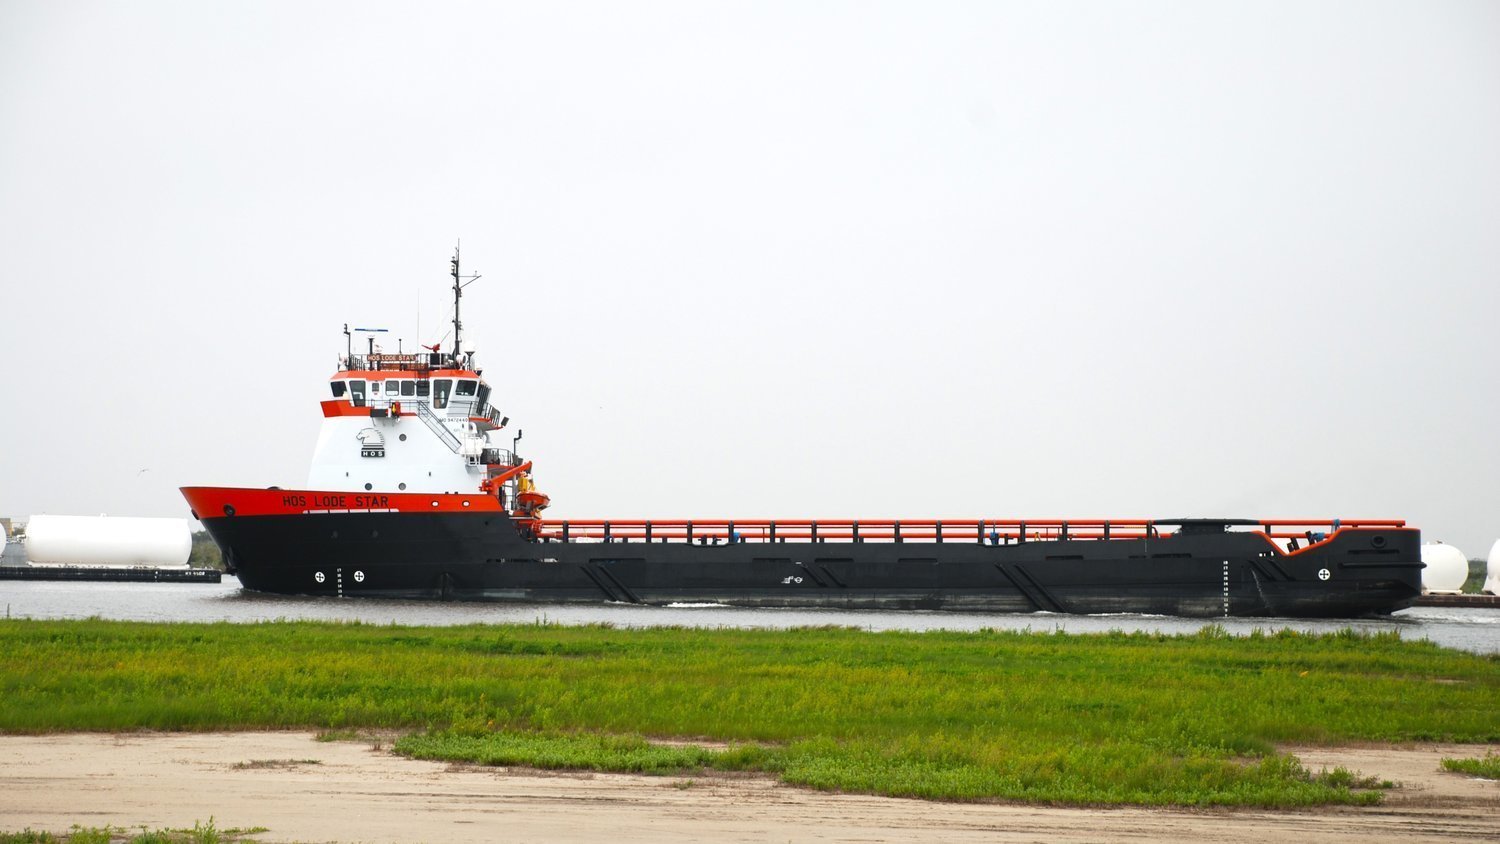 The Steamship Authority is purchasing two offshore supply vessels, including the HOS Lode Star, above, from a Louisiana company to replace its freight boats M/V Katama and M/V Gay Head.